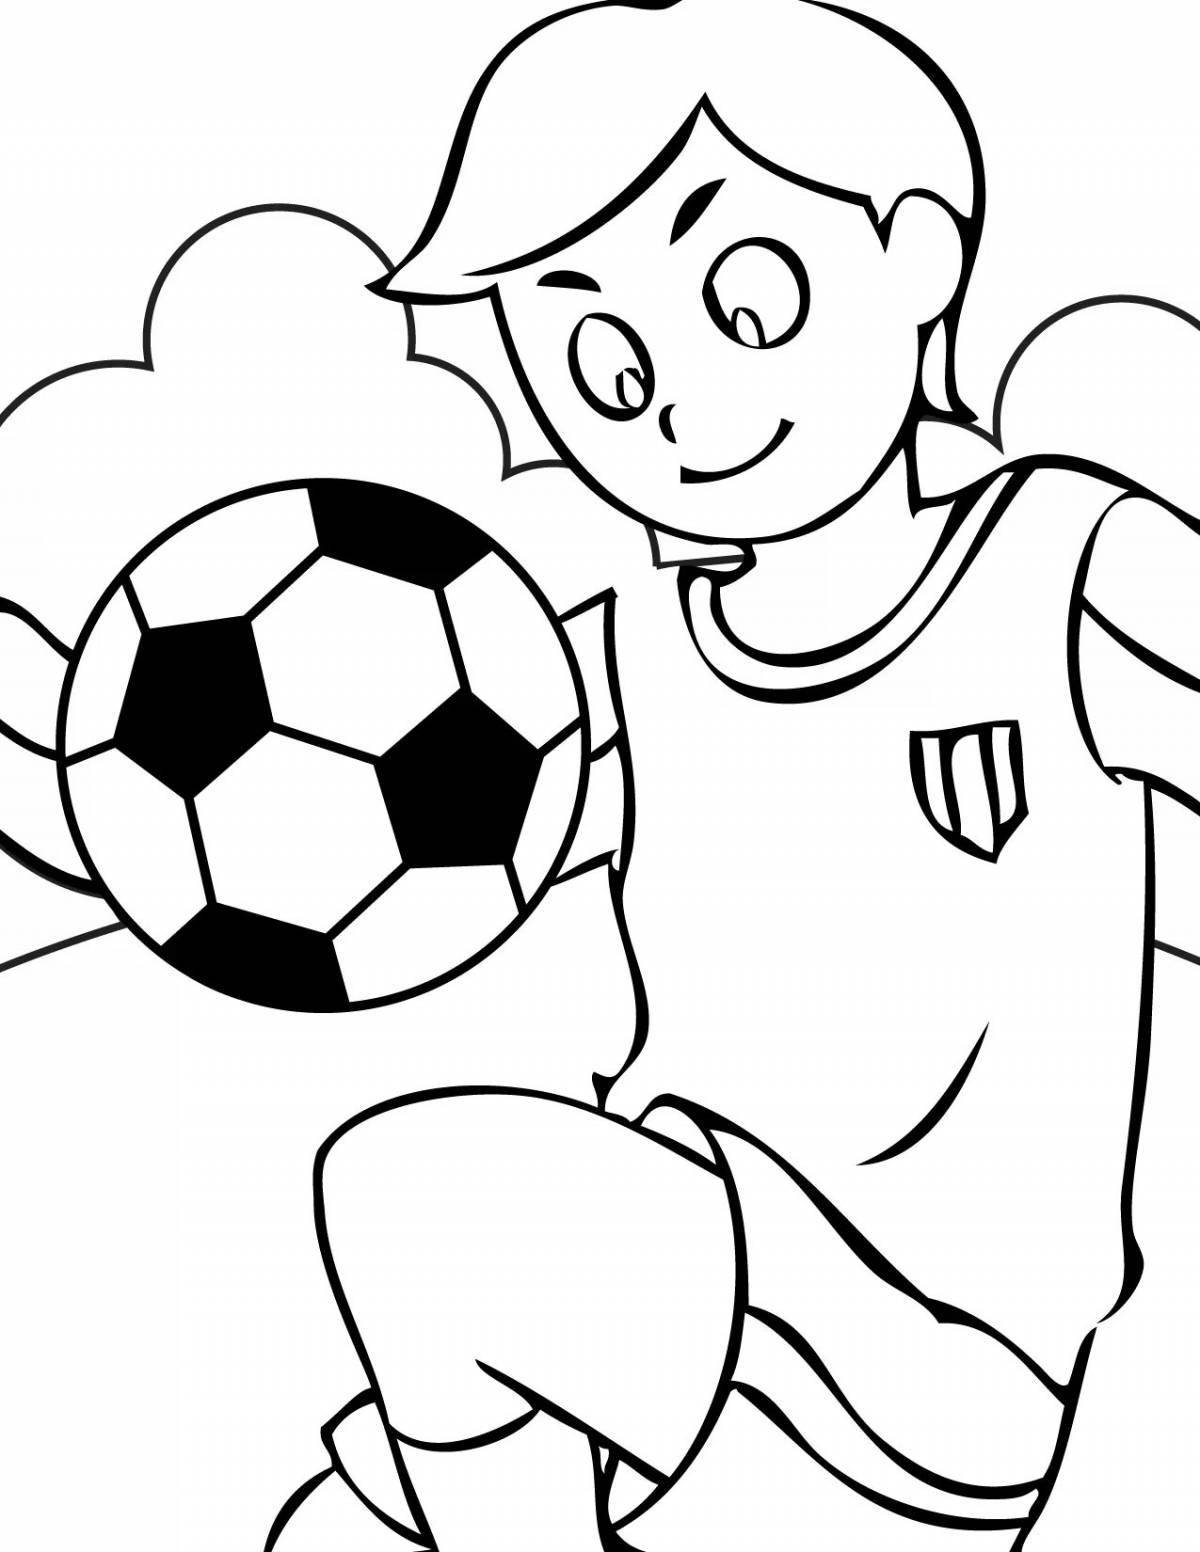 Colourful football player coloring book for kids